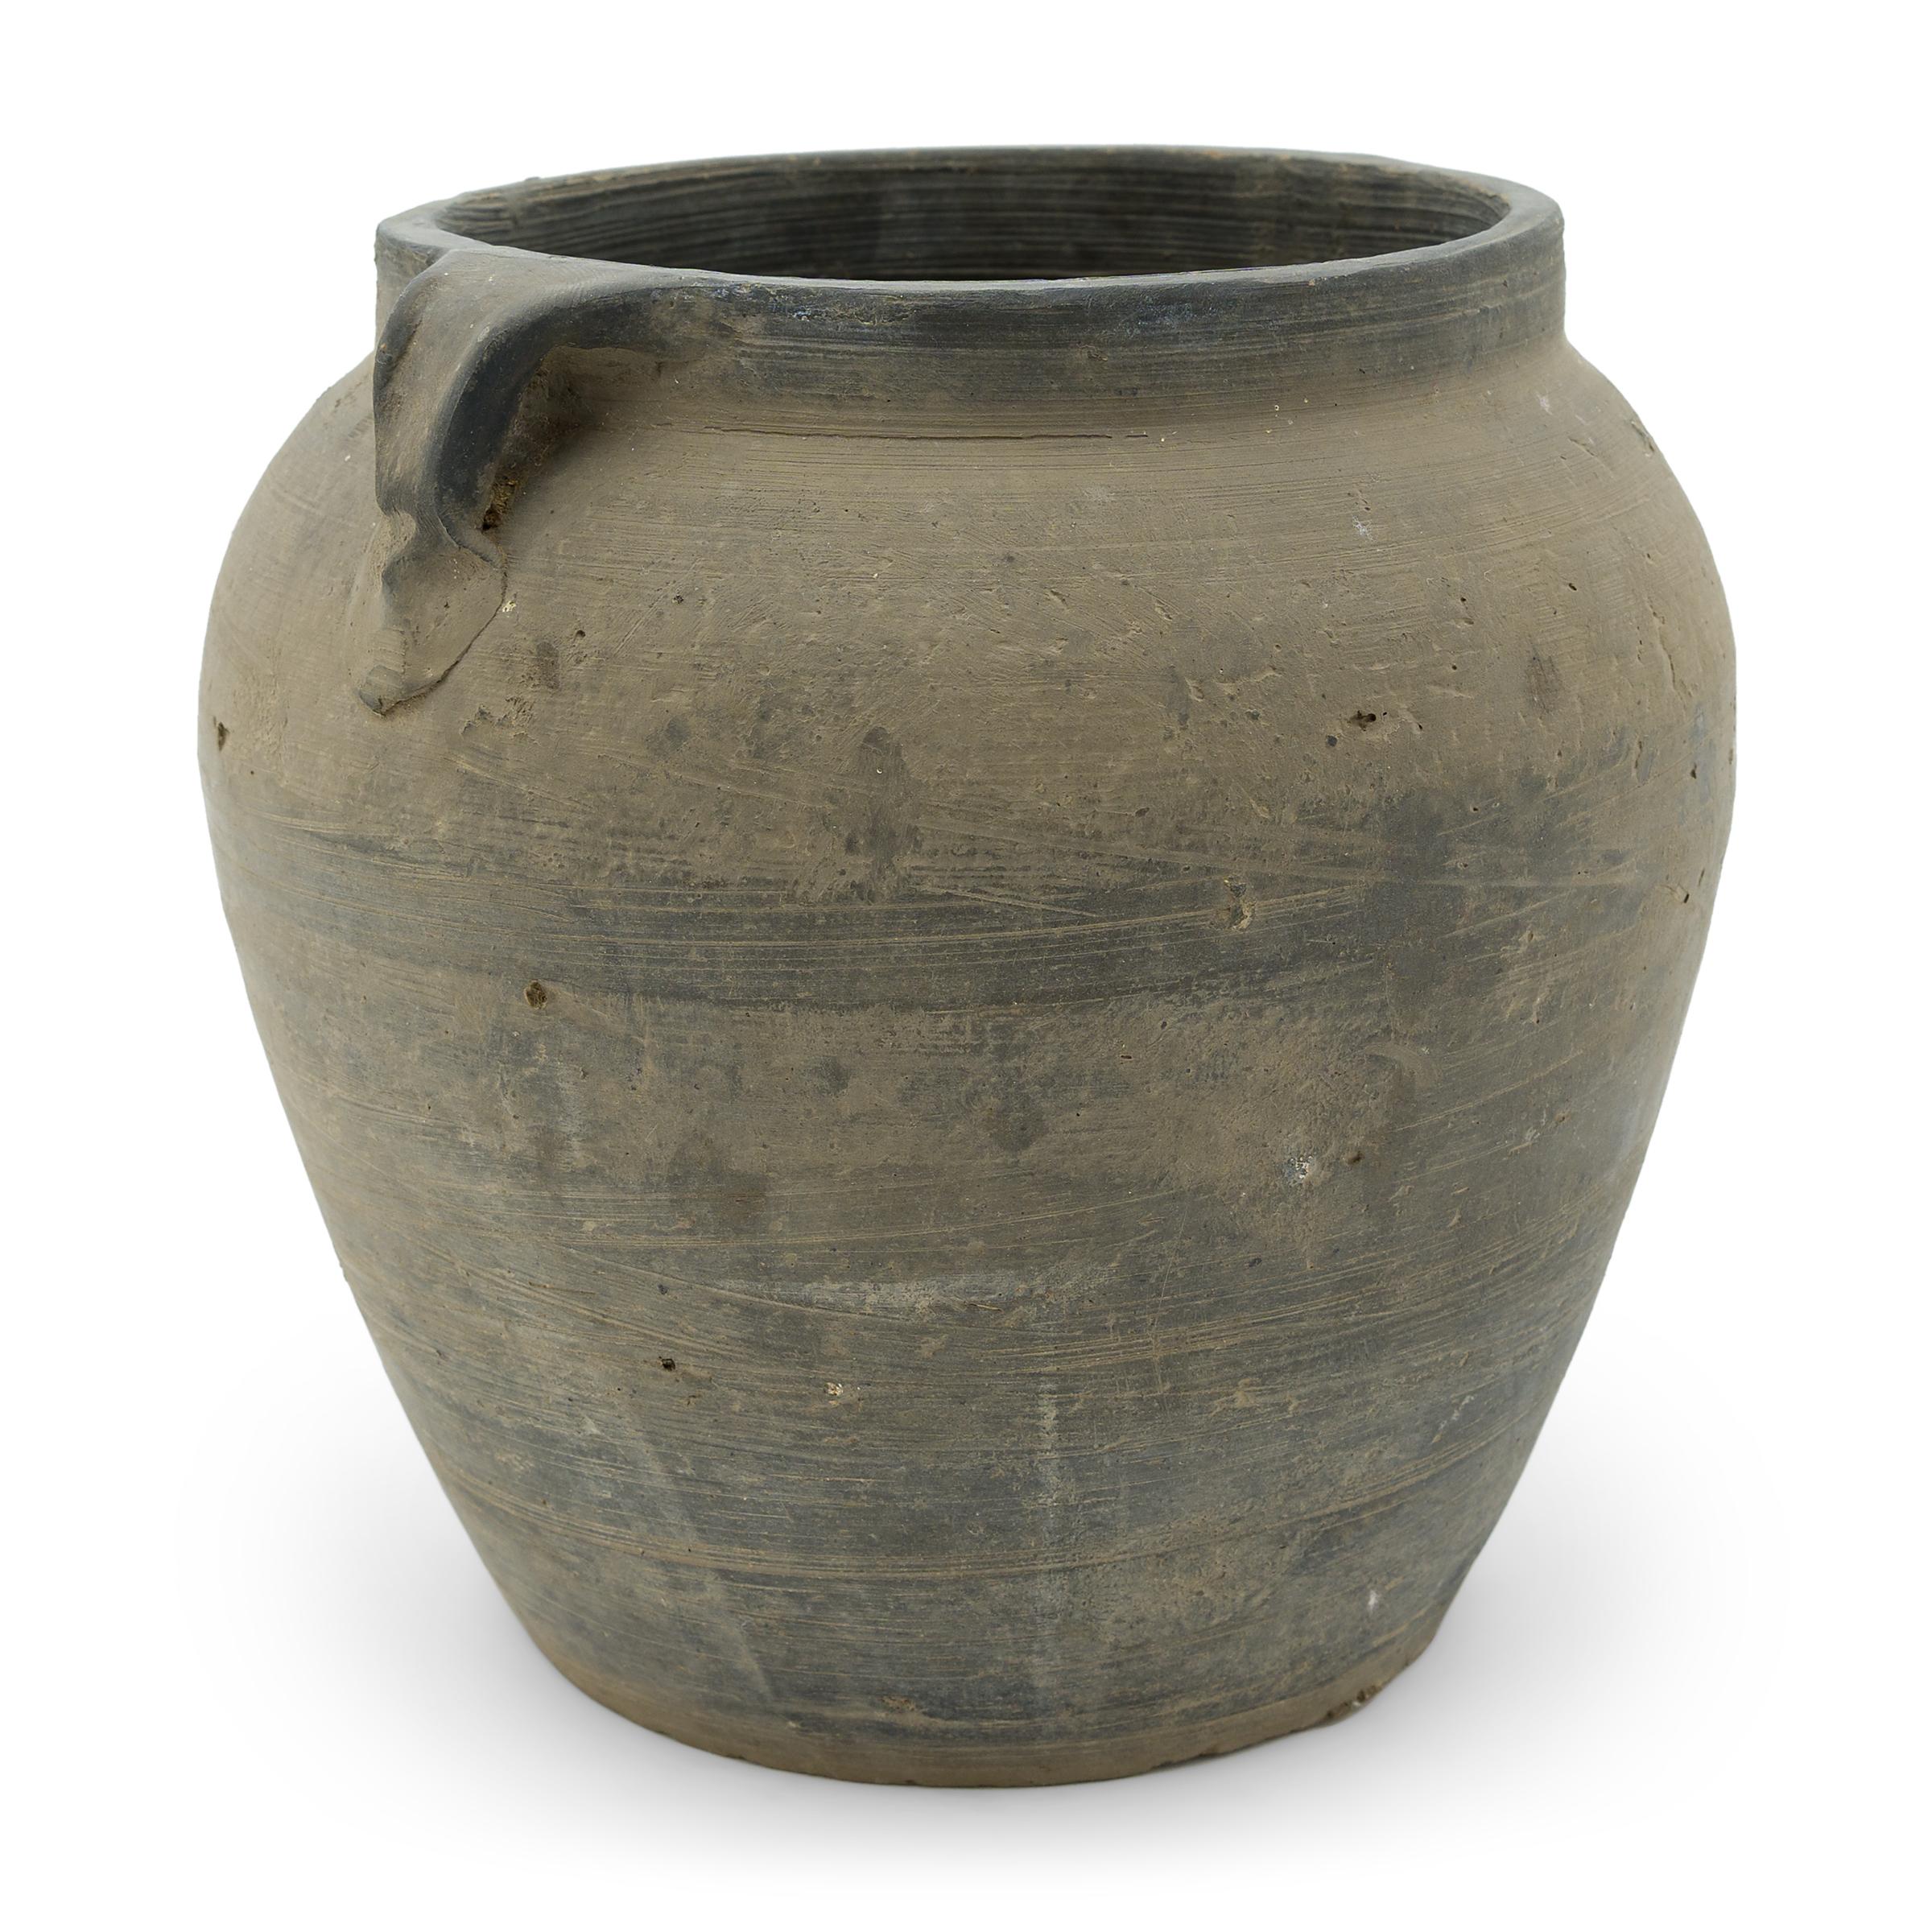 Charged with the humble task of storing dry goods, this small earthenware jar is hand-shaped with balanced proportions and a beautifully irregular unglazed surface. The round jar has a gently tapered form with a narrowed neck and high shoulders